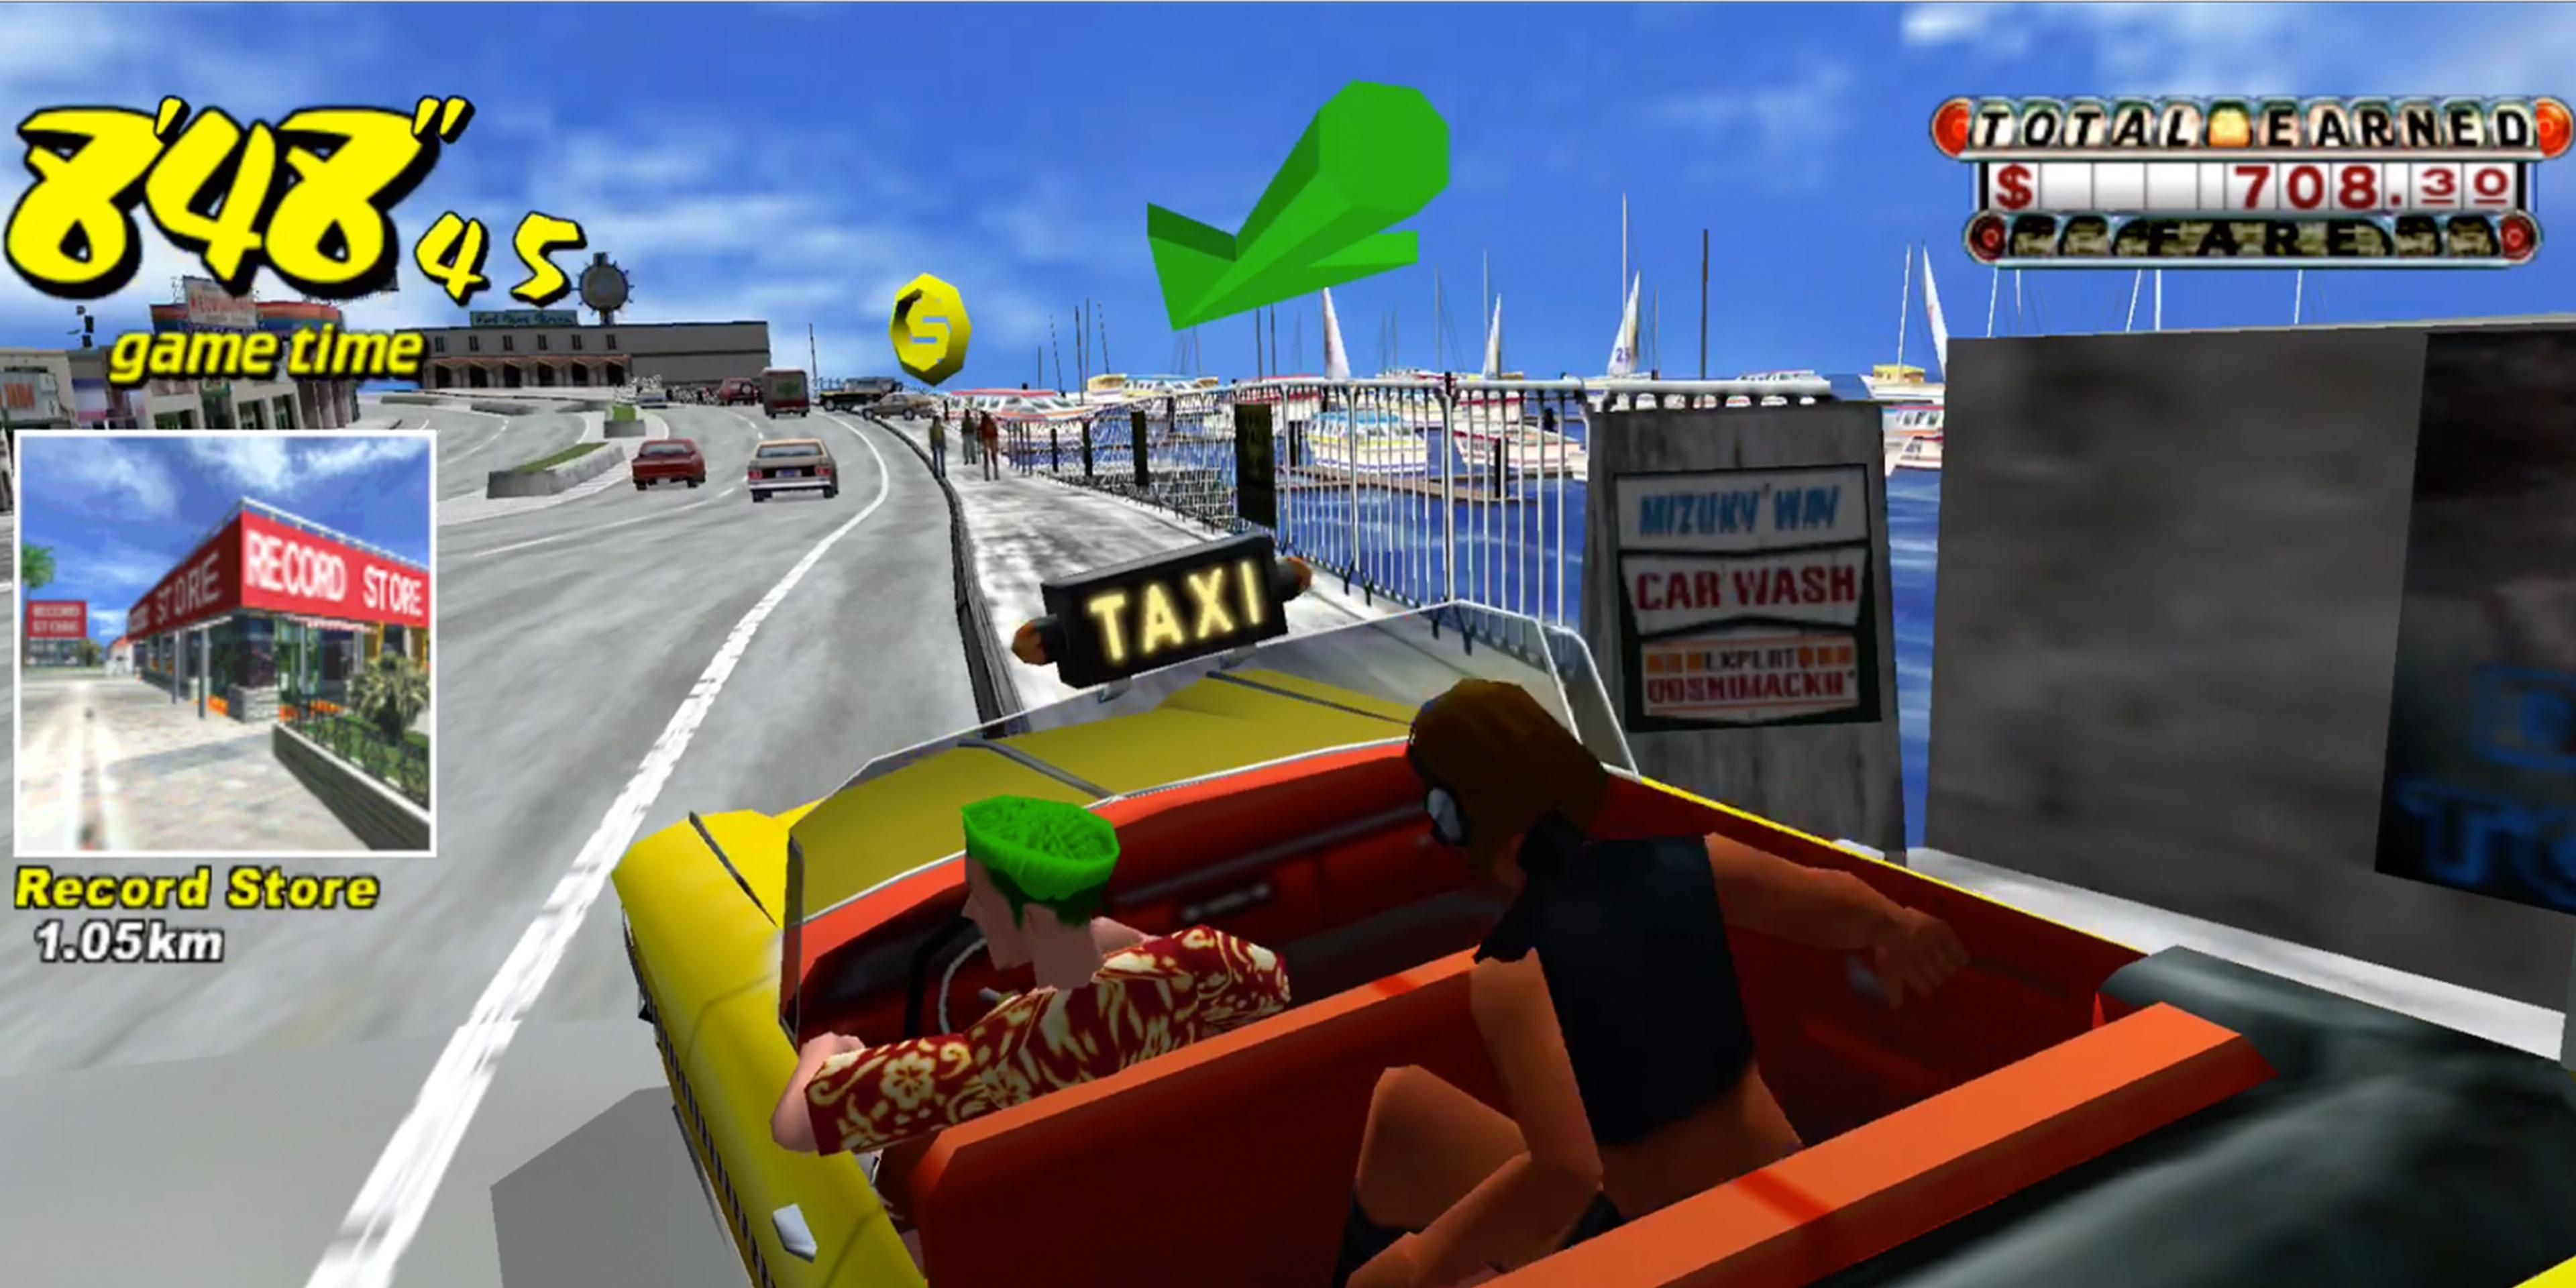 SEGA is Resurrecting Some of its Most Iconic Games Like Crazy Taxi, Jet Set  Radio, and Streets of Rage